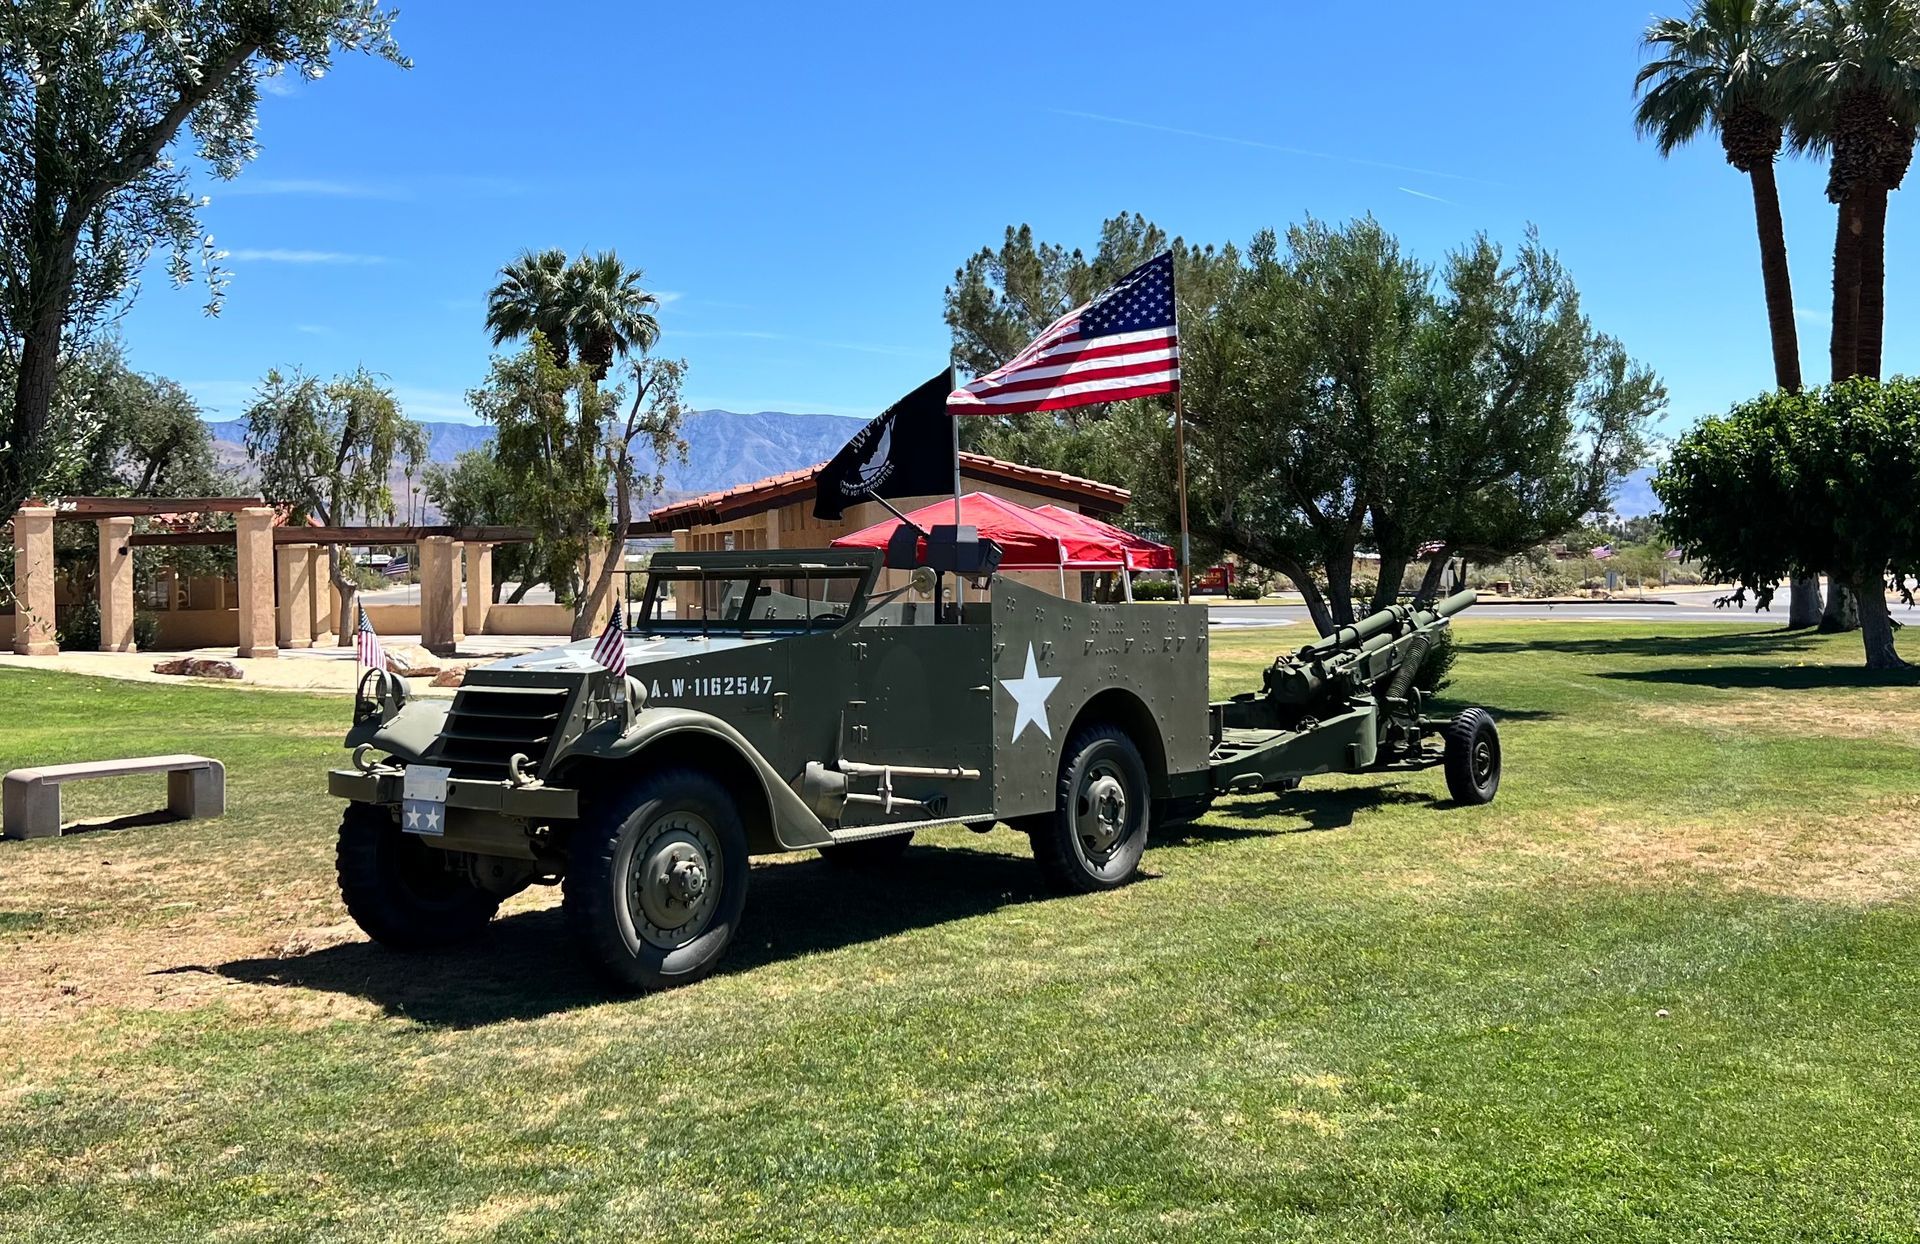 Borrego Springs' WWII Scout Car